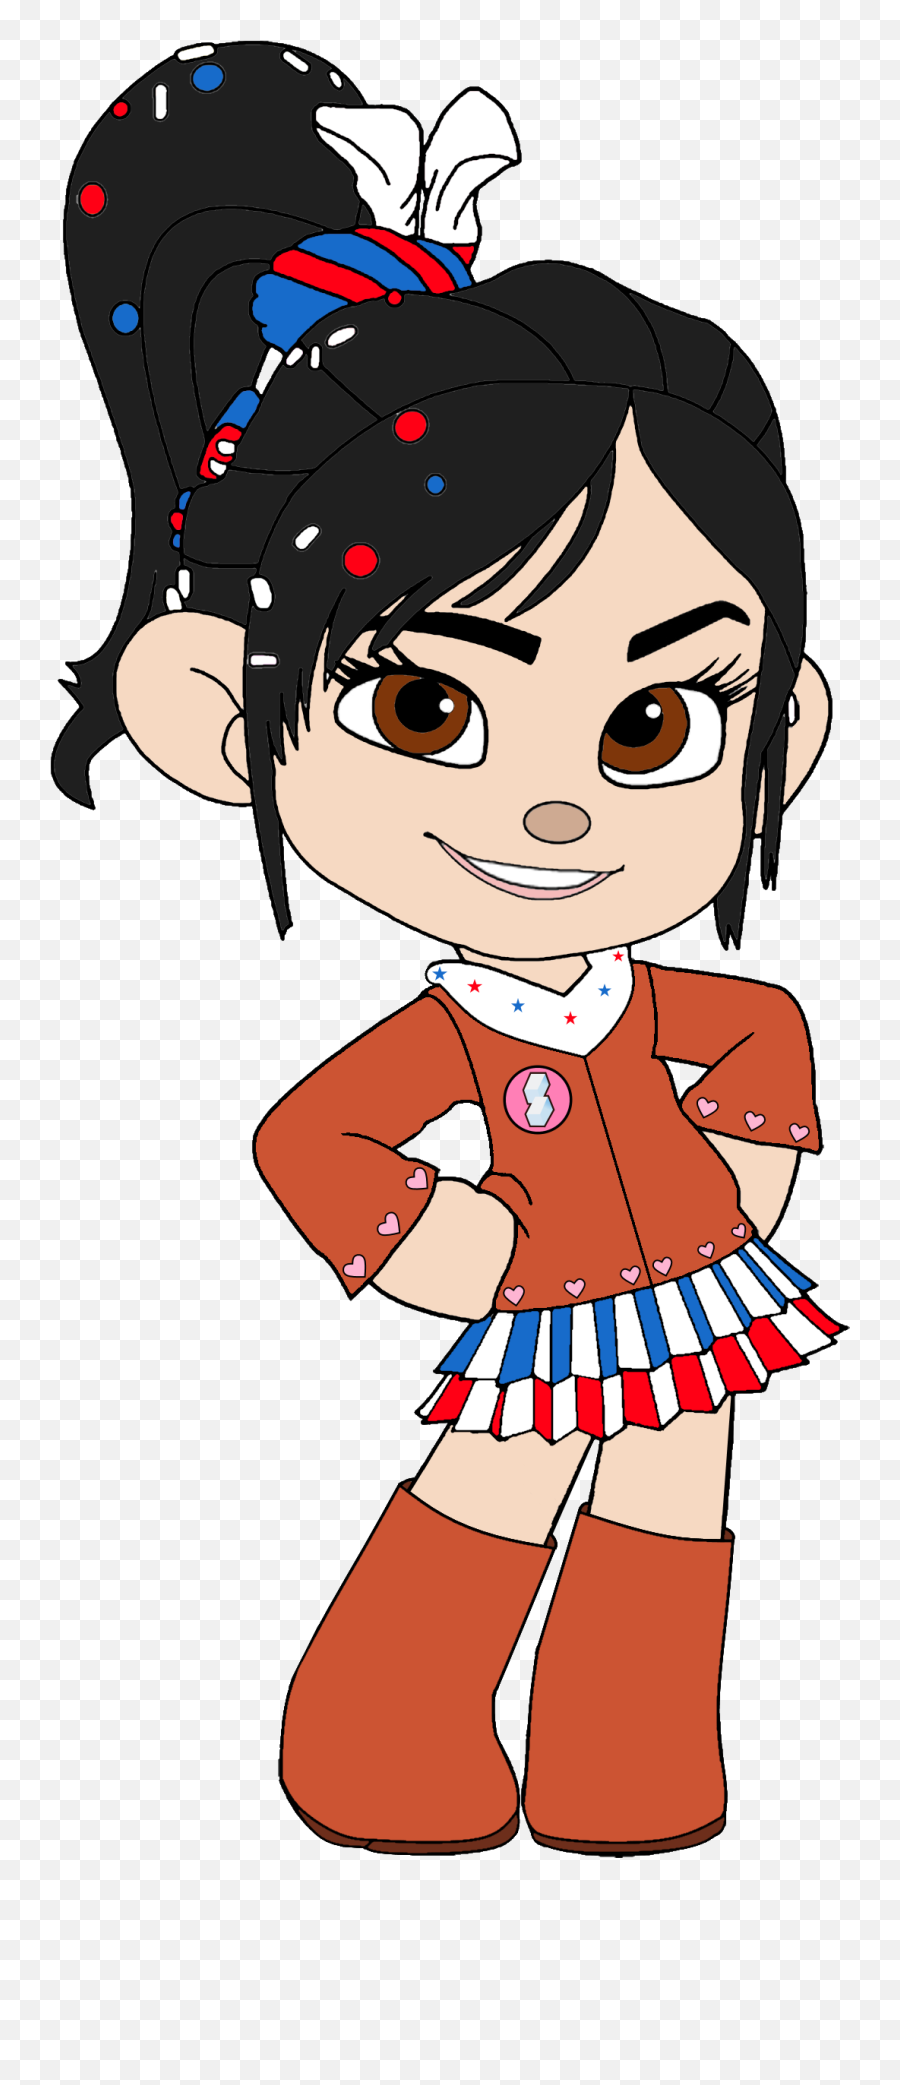 Vanellope As A Cowgirlpng 43311 - Png Images Pngio Vanellope Wreck It Ralph Clipart,Cowgirl Png